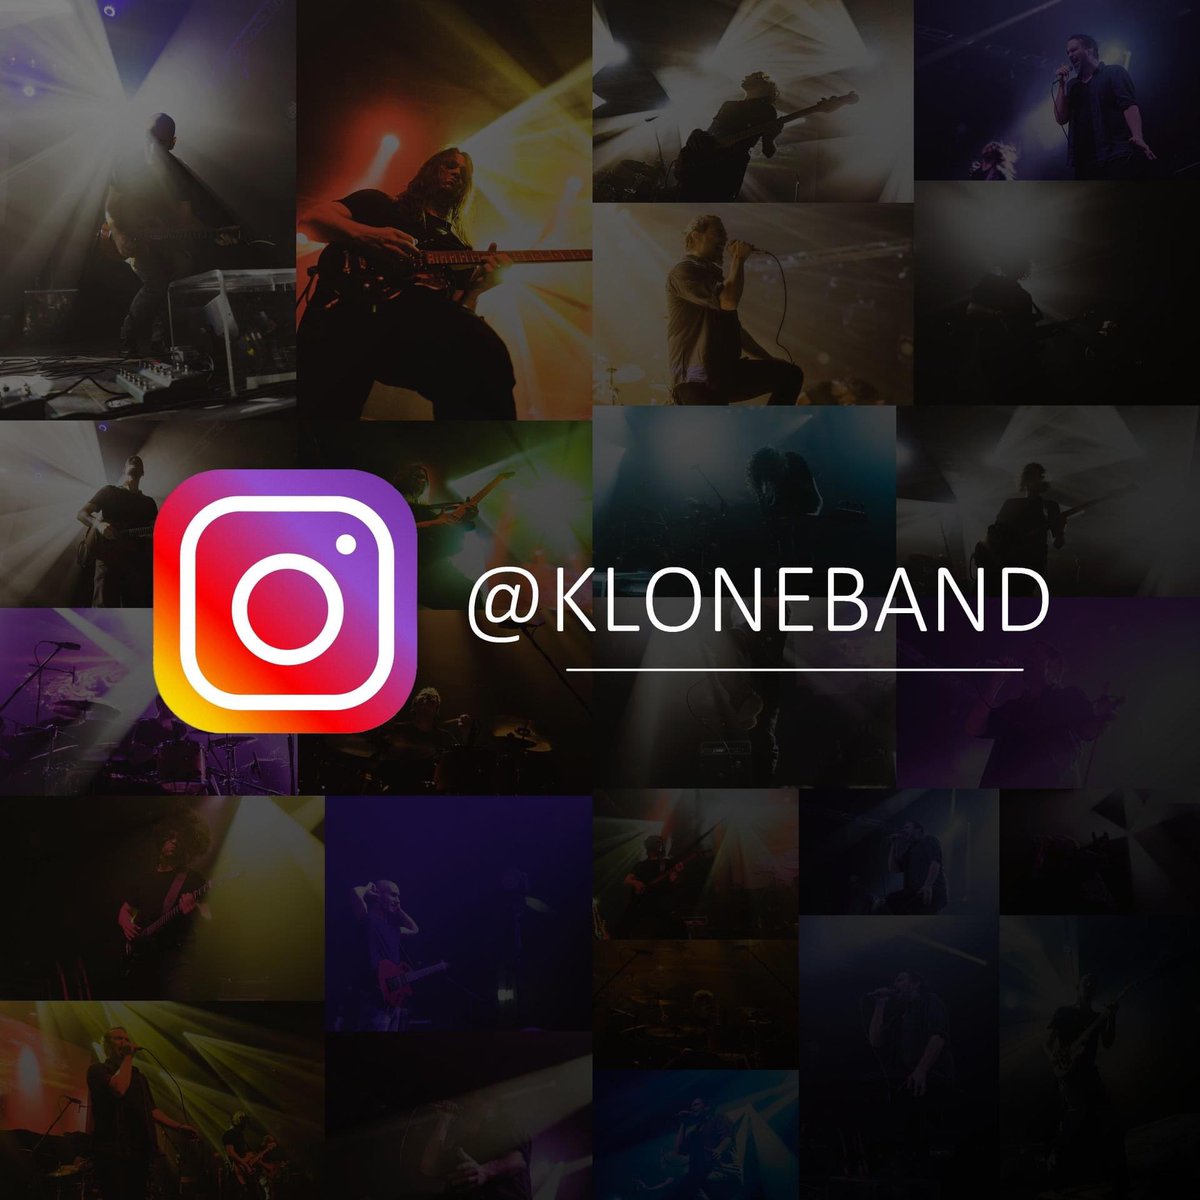 For those who don’t know, we are also alive on Instagram ! You will find some great pics, tour diaries and many more...